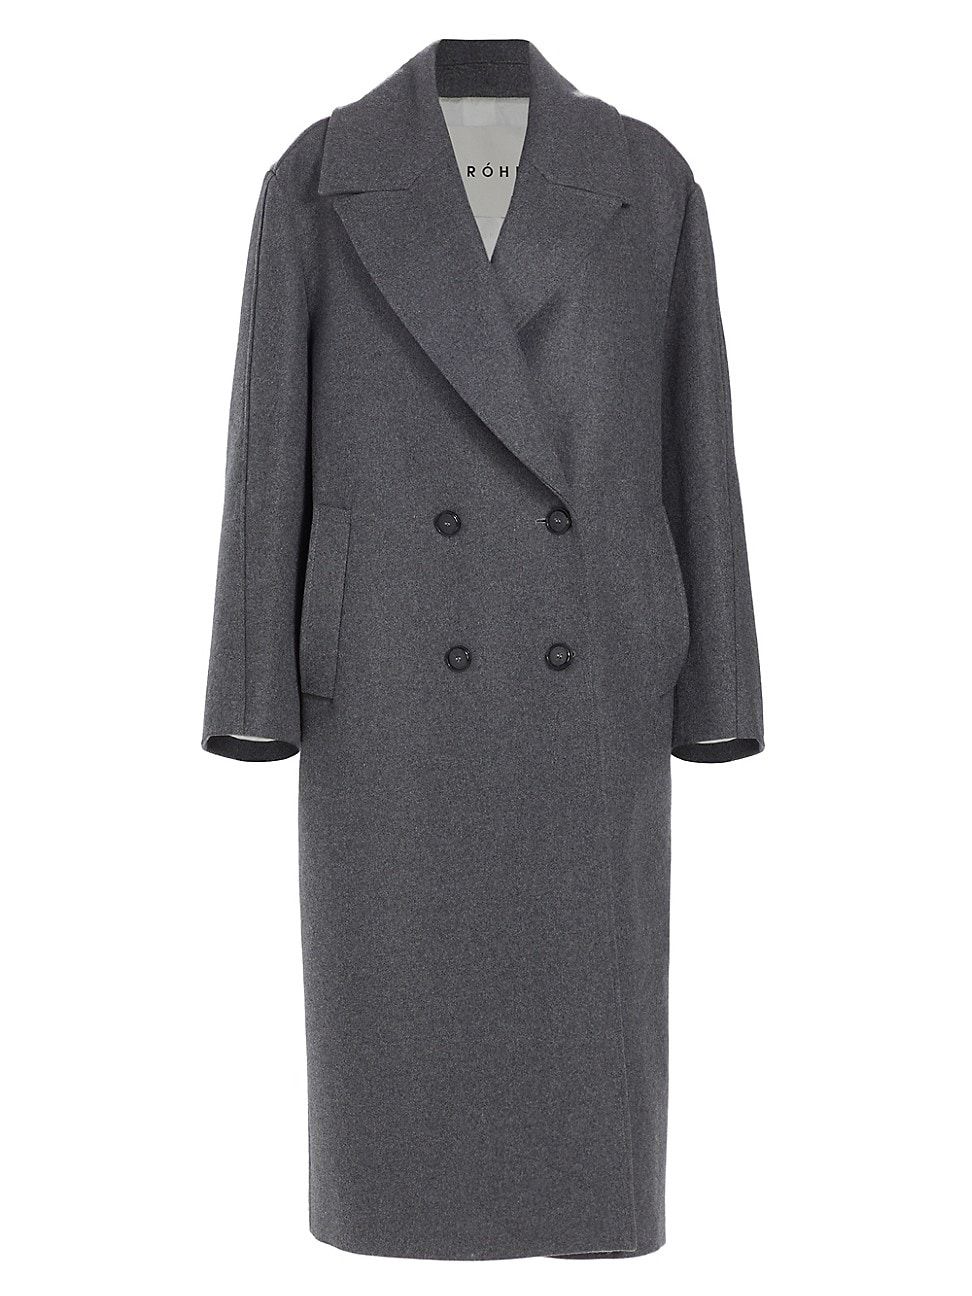 Women's Double-Breasted Wool-Blend Coat - Anthracite Melange - Size 8 | Saks Fifth Avenue